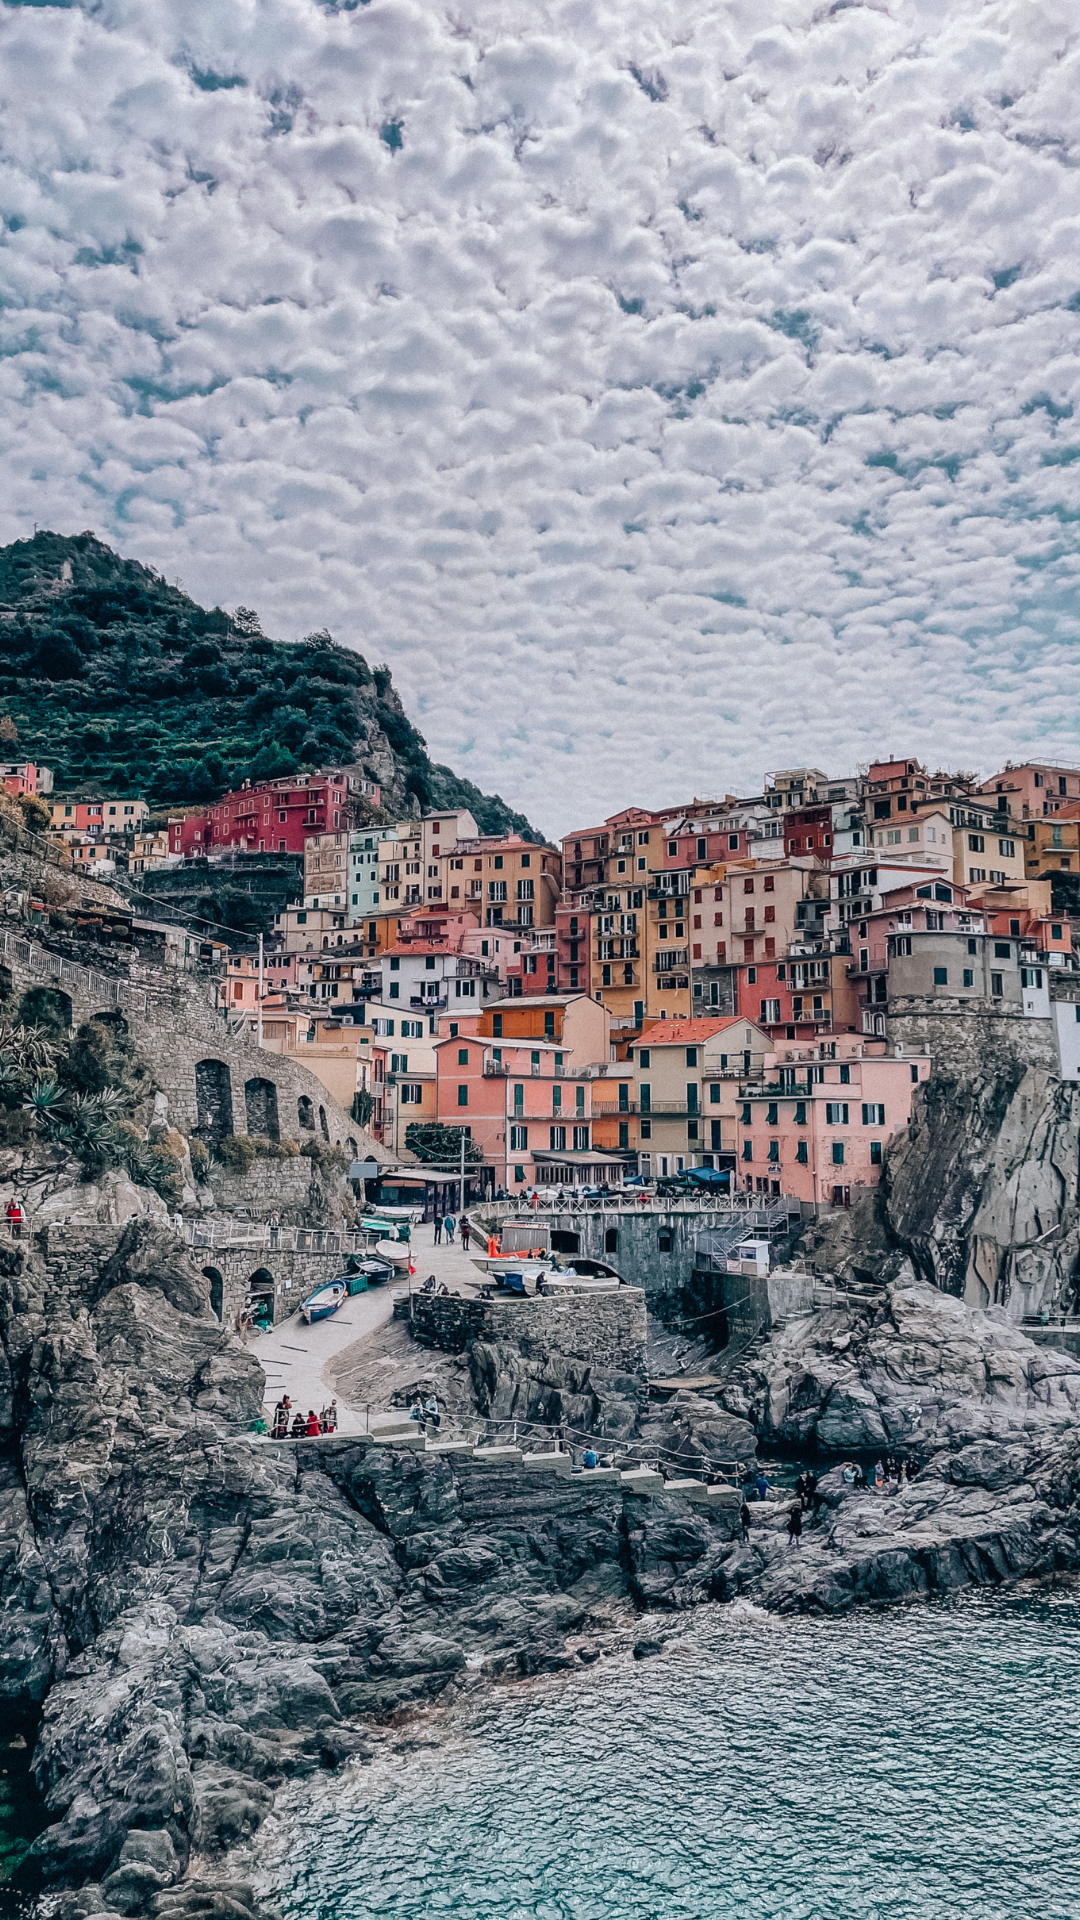 Under the vibrant summer sun, the iconic colorful houses of Cinque Terre cling to the rugged cliffside, each hue a testament to the coastal charm of the Italian Riviera. Above, fluffy white clouds form a picturesque dance across the azure sky, casting playful shadows on the picturesque scene. A harmonious blend of nature's beauty and human ingenuity, capturing the essence of a perfect summer day in Cinque Terre.